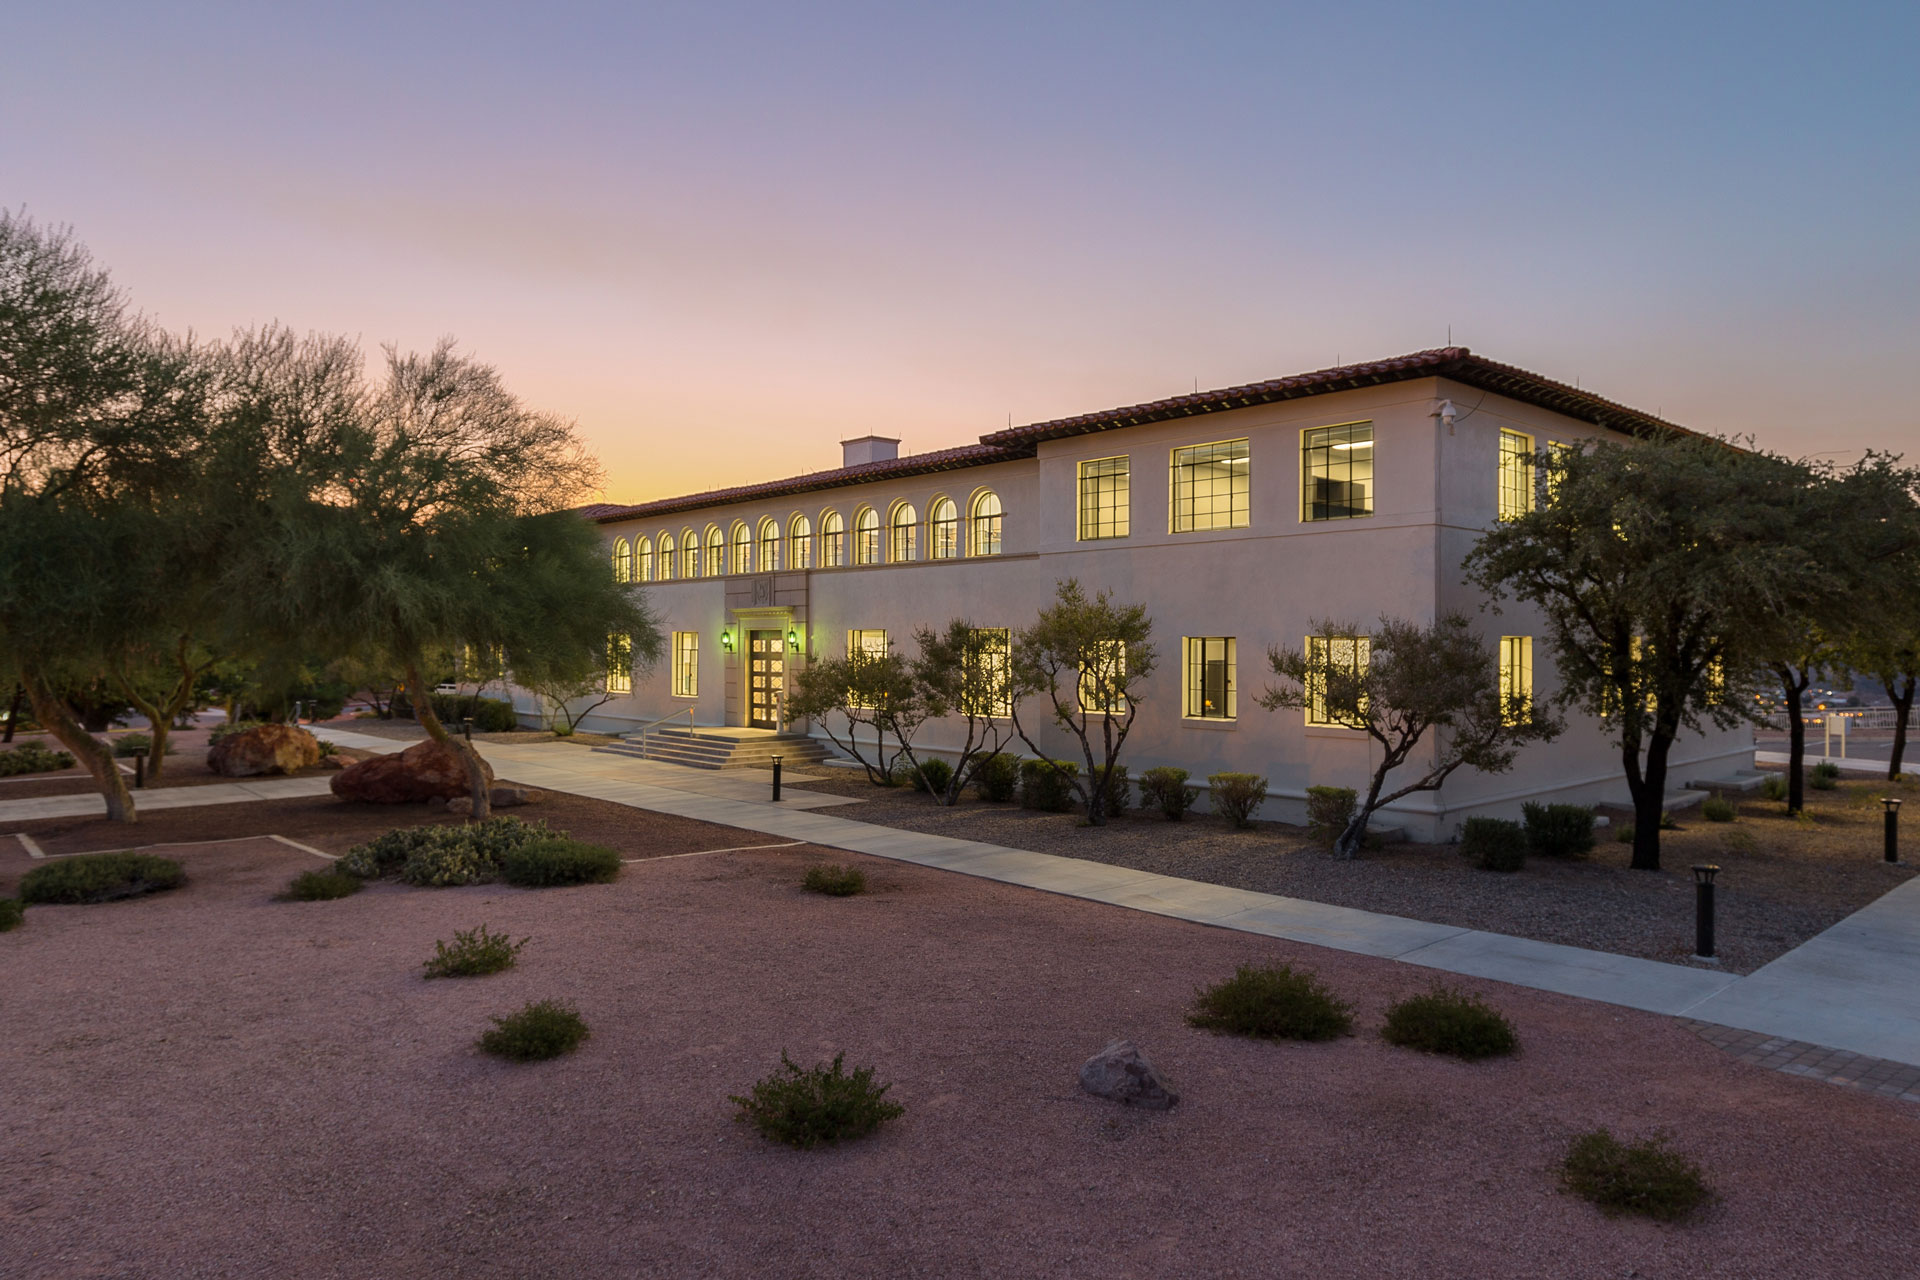 A white two-story stucco building with many windows and desert landscaping in the foreground and a yellow and purple sunset in the background.